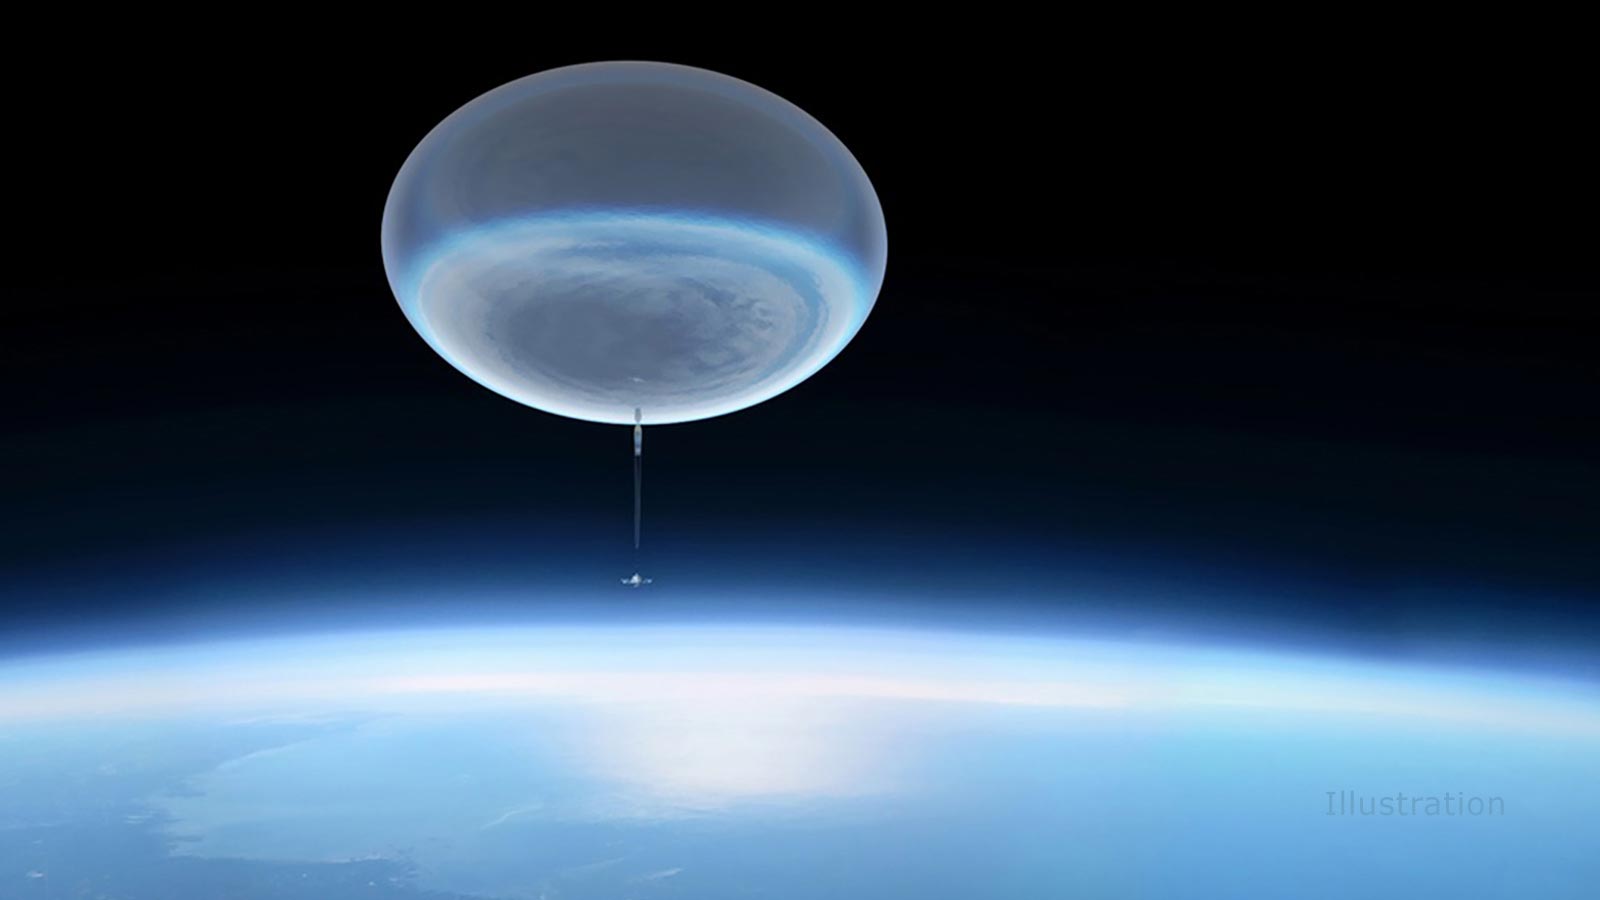 NASA ASTHROS Stratospheric Balloon the Size of a Football Stadium Will Carry a Cutting-Edge Telescope